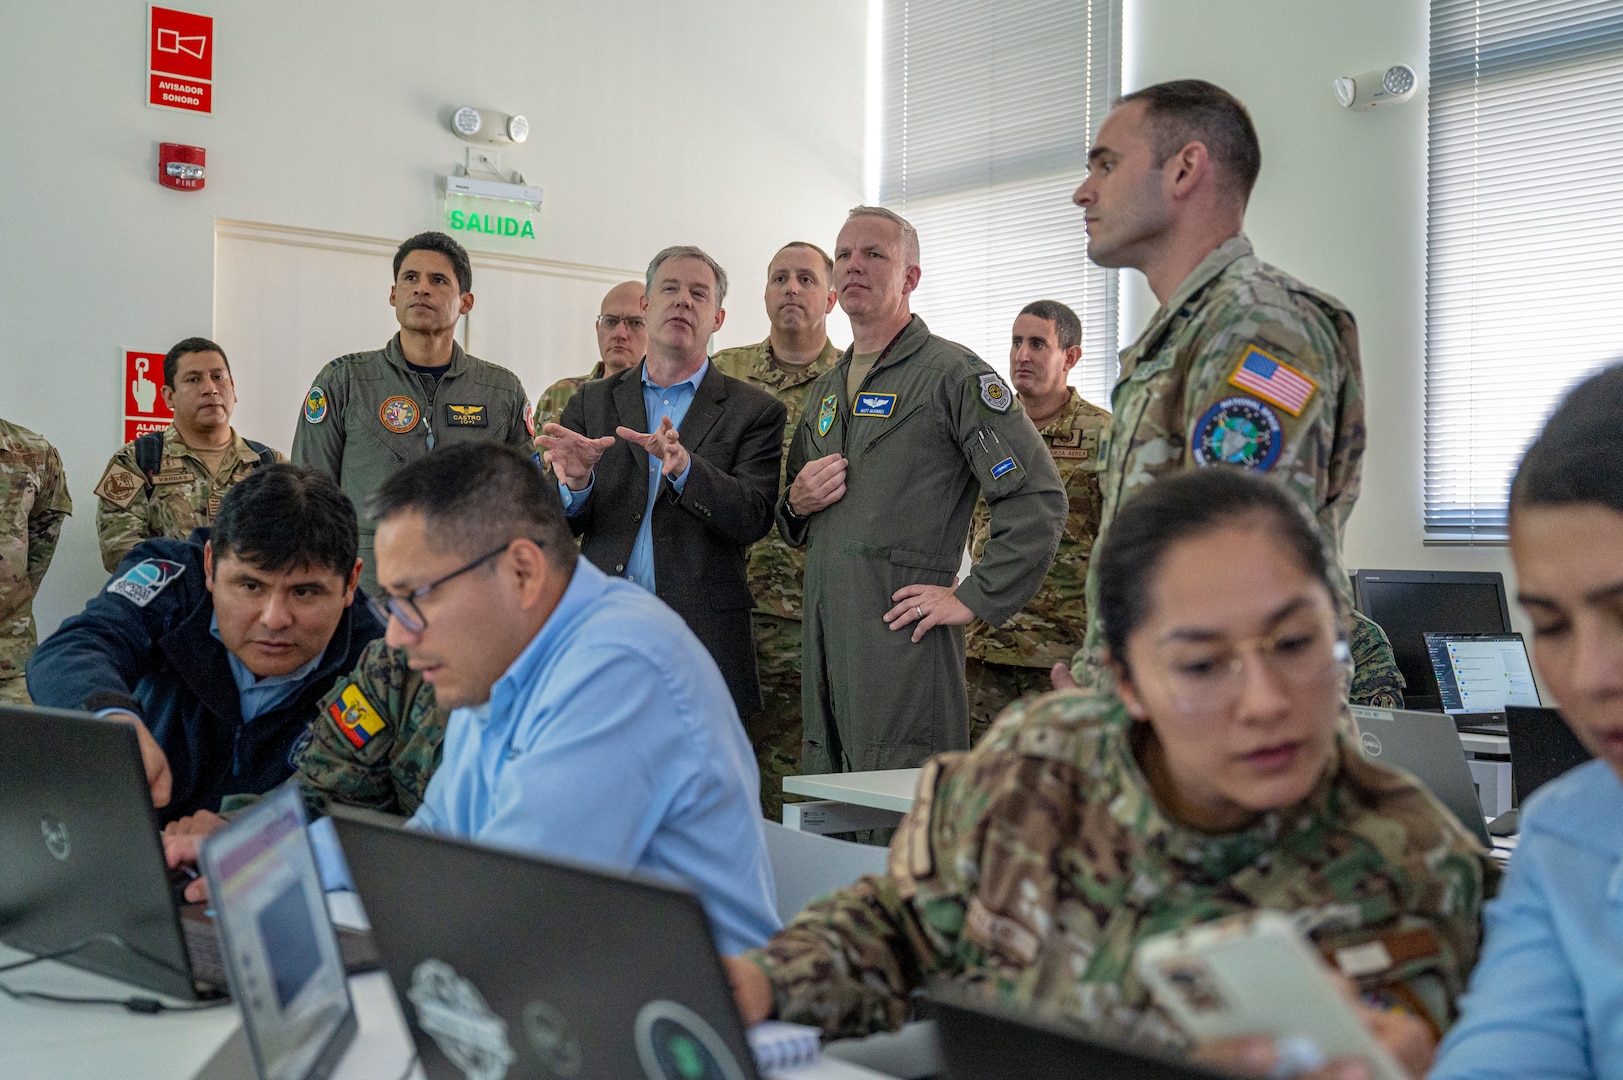 U.S. Air Force Col. Matt McKinney, Resolute Sentinel 23 Combined Joint Task Force Commander, and Fuerza Aérea del Perú Col. Fidel Castro, Resolute Sentinel 23 CJTF Deputy Commander, conduct a tour at the Centro Nacional de Operaciones de Imágenes Satelitales, Lima, Peru, July 4, 2023, as part of Resolute Sentinel 23. The space exercise, led by U.S. Southern Command in partnership with U.S. Space Command’s Joint Task Force Space Defense Commercial Operations (JCO) Cell, the Peruvian Aerospace Research and Development Center (CONIDA), and the Peruvian Air Force, aims to bolster the region's emerging space programs.  (U.S. Air Force photo by Staff Sgt. Matthew Matlock)